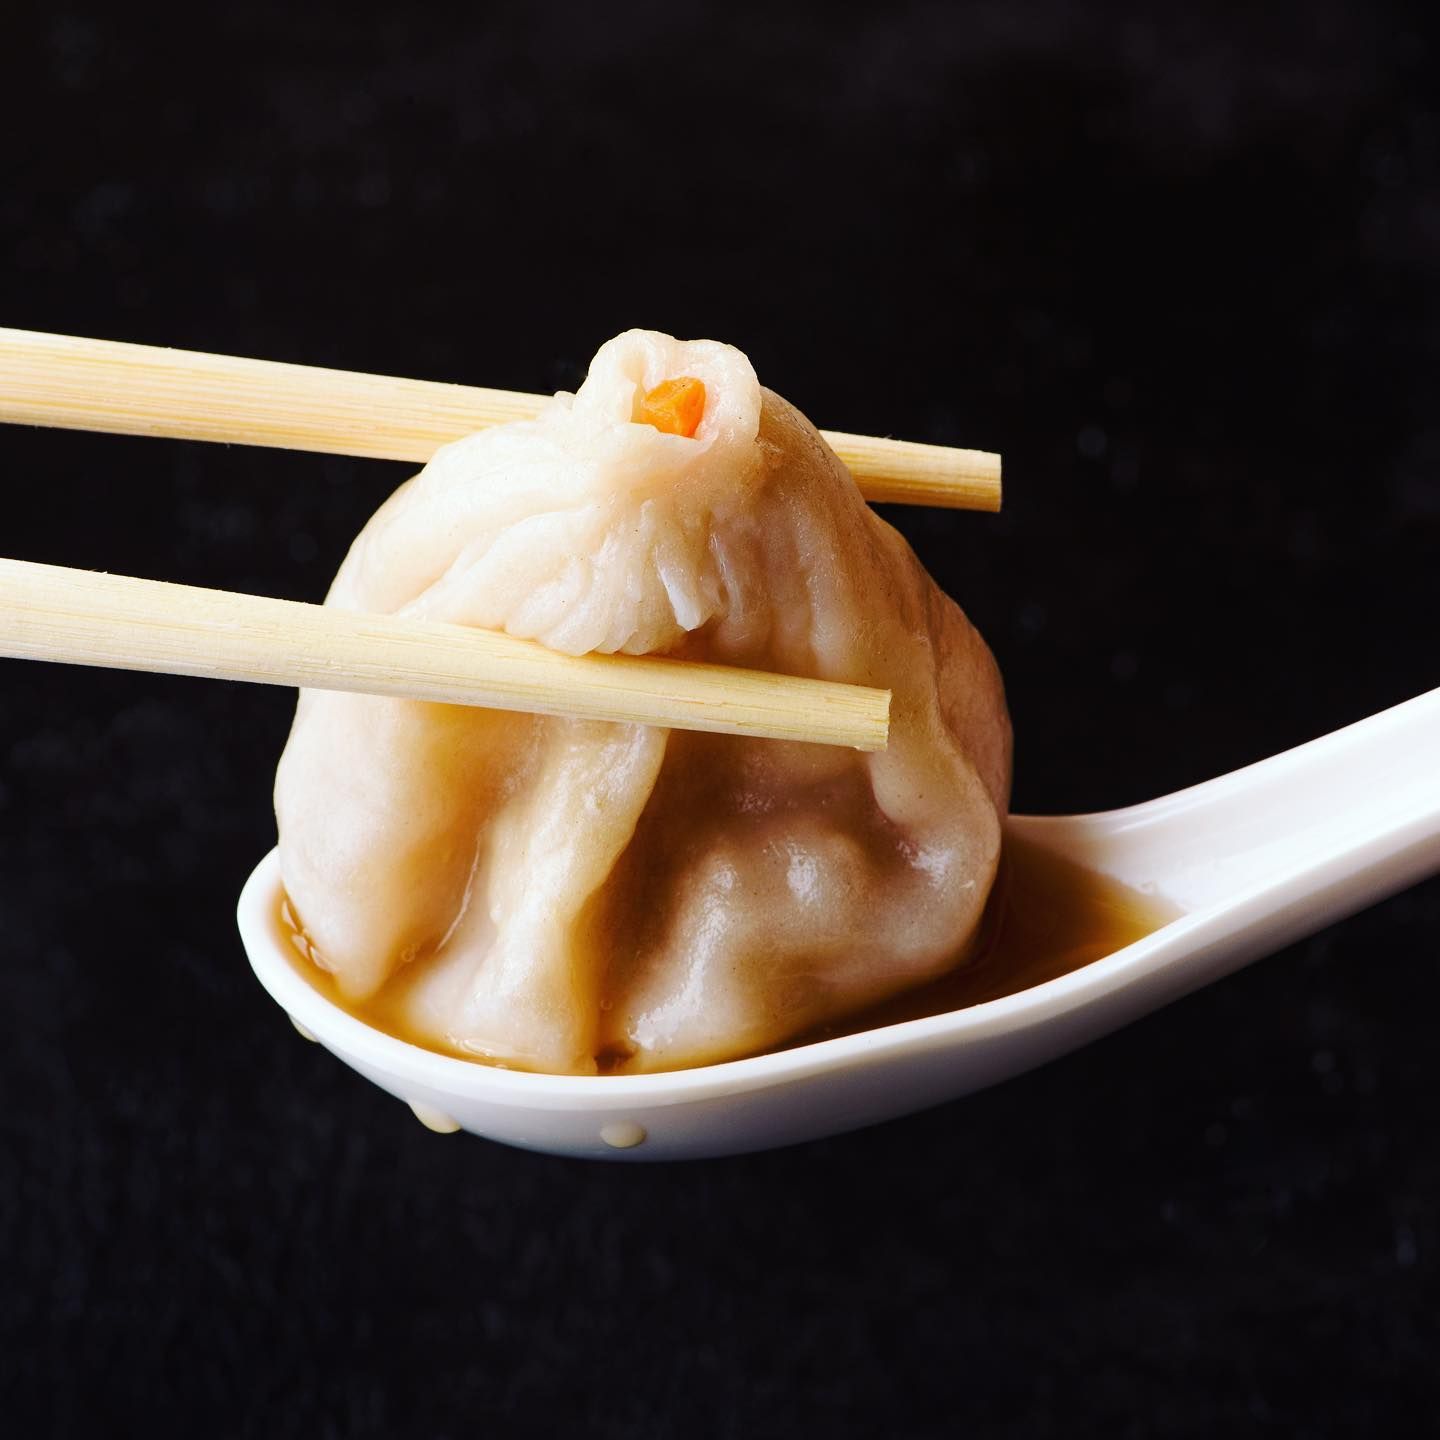 Brooklyn Dumpling Shop Continues Rapid Southern Expansion With Its First Franchise Deal in Atlanta